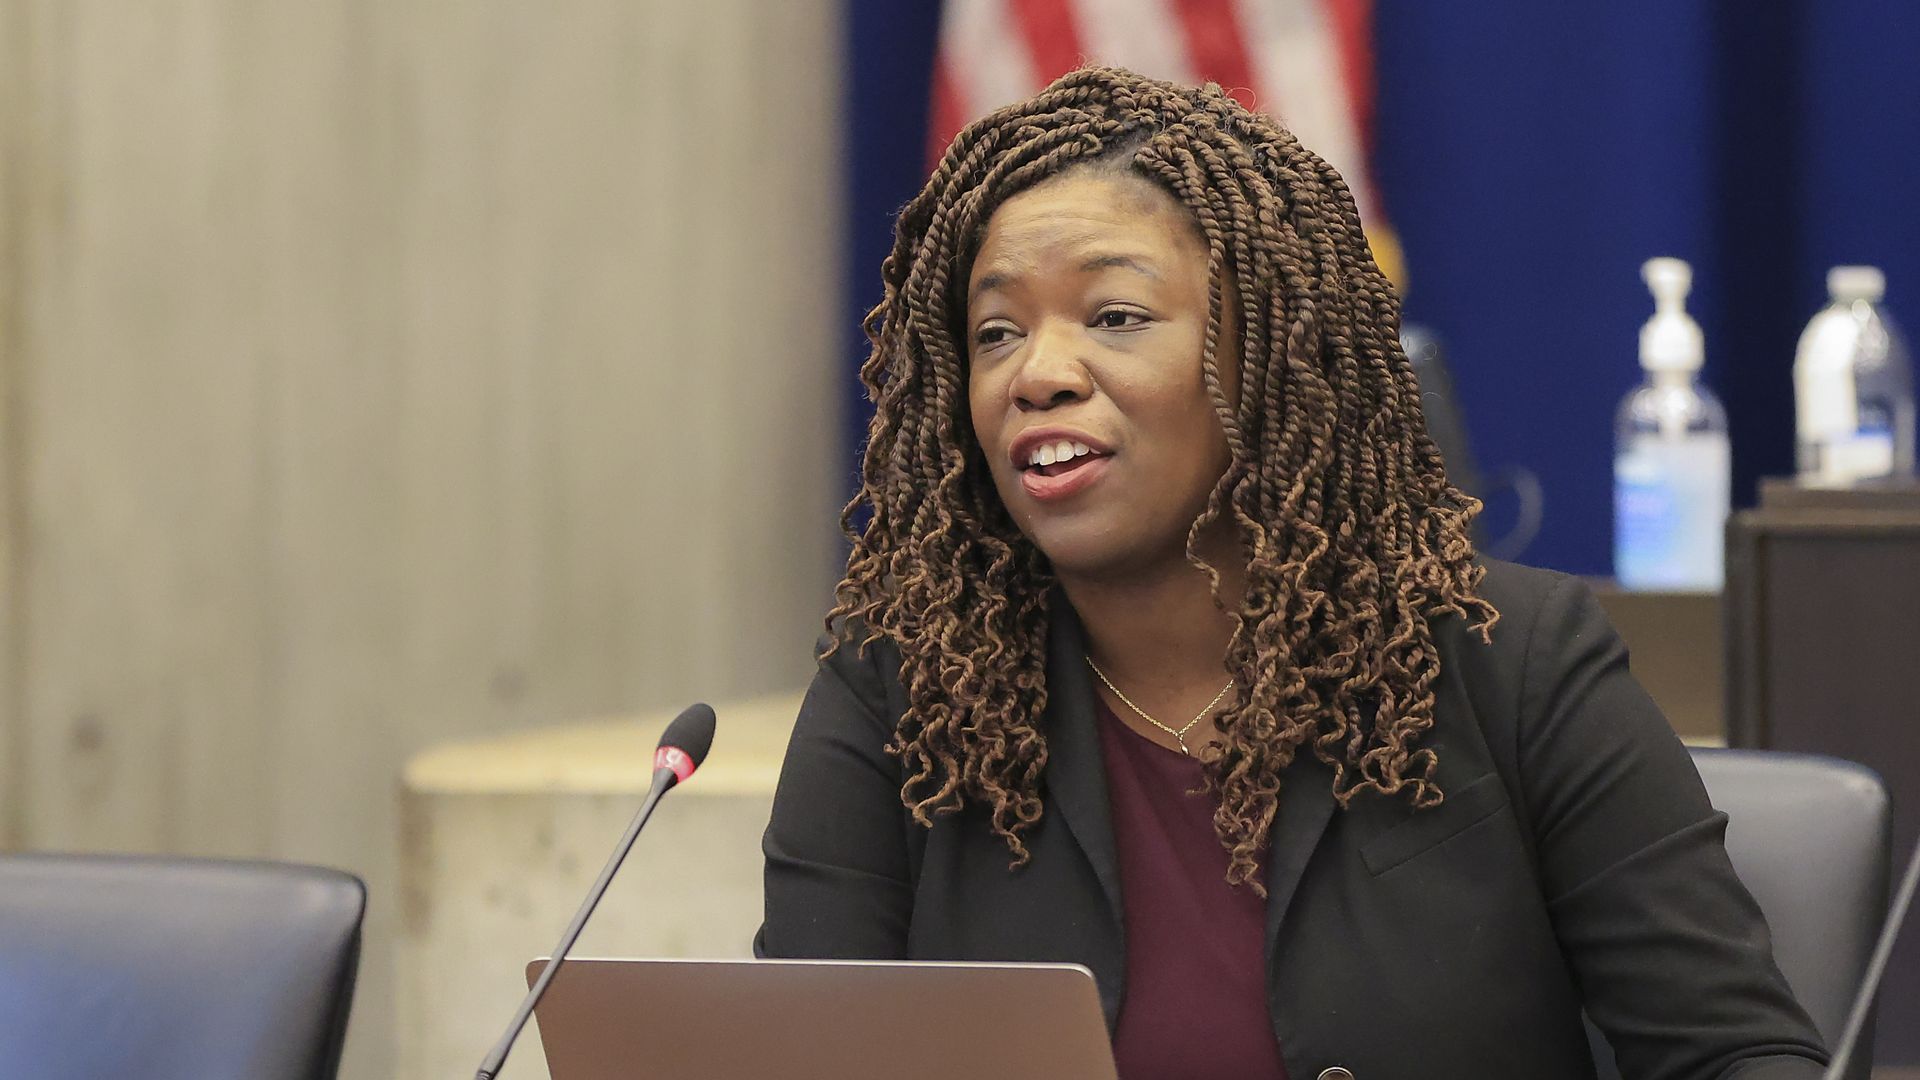 Boston City Councilor Ruthzee Louijeune holds a hearing on migrants in the chambers at City Hall.